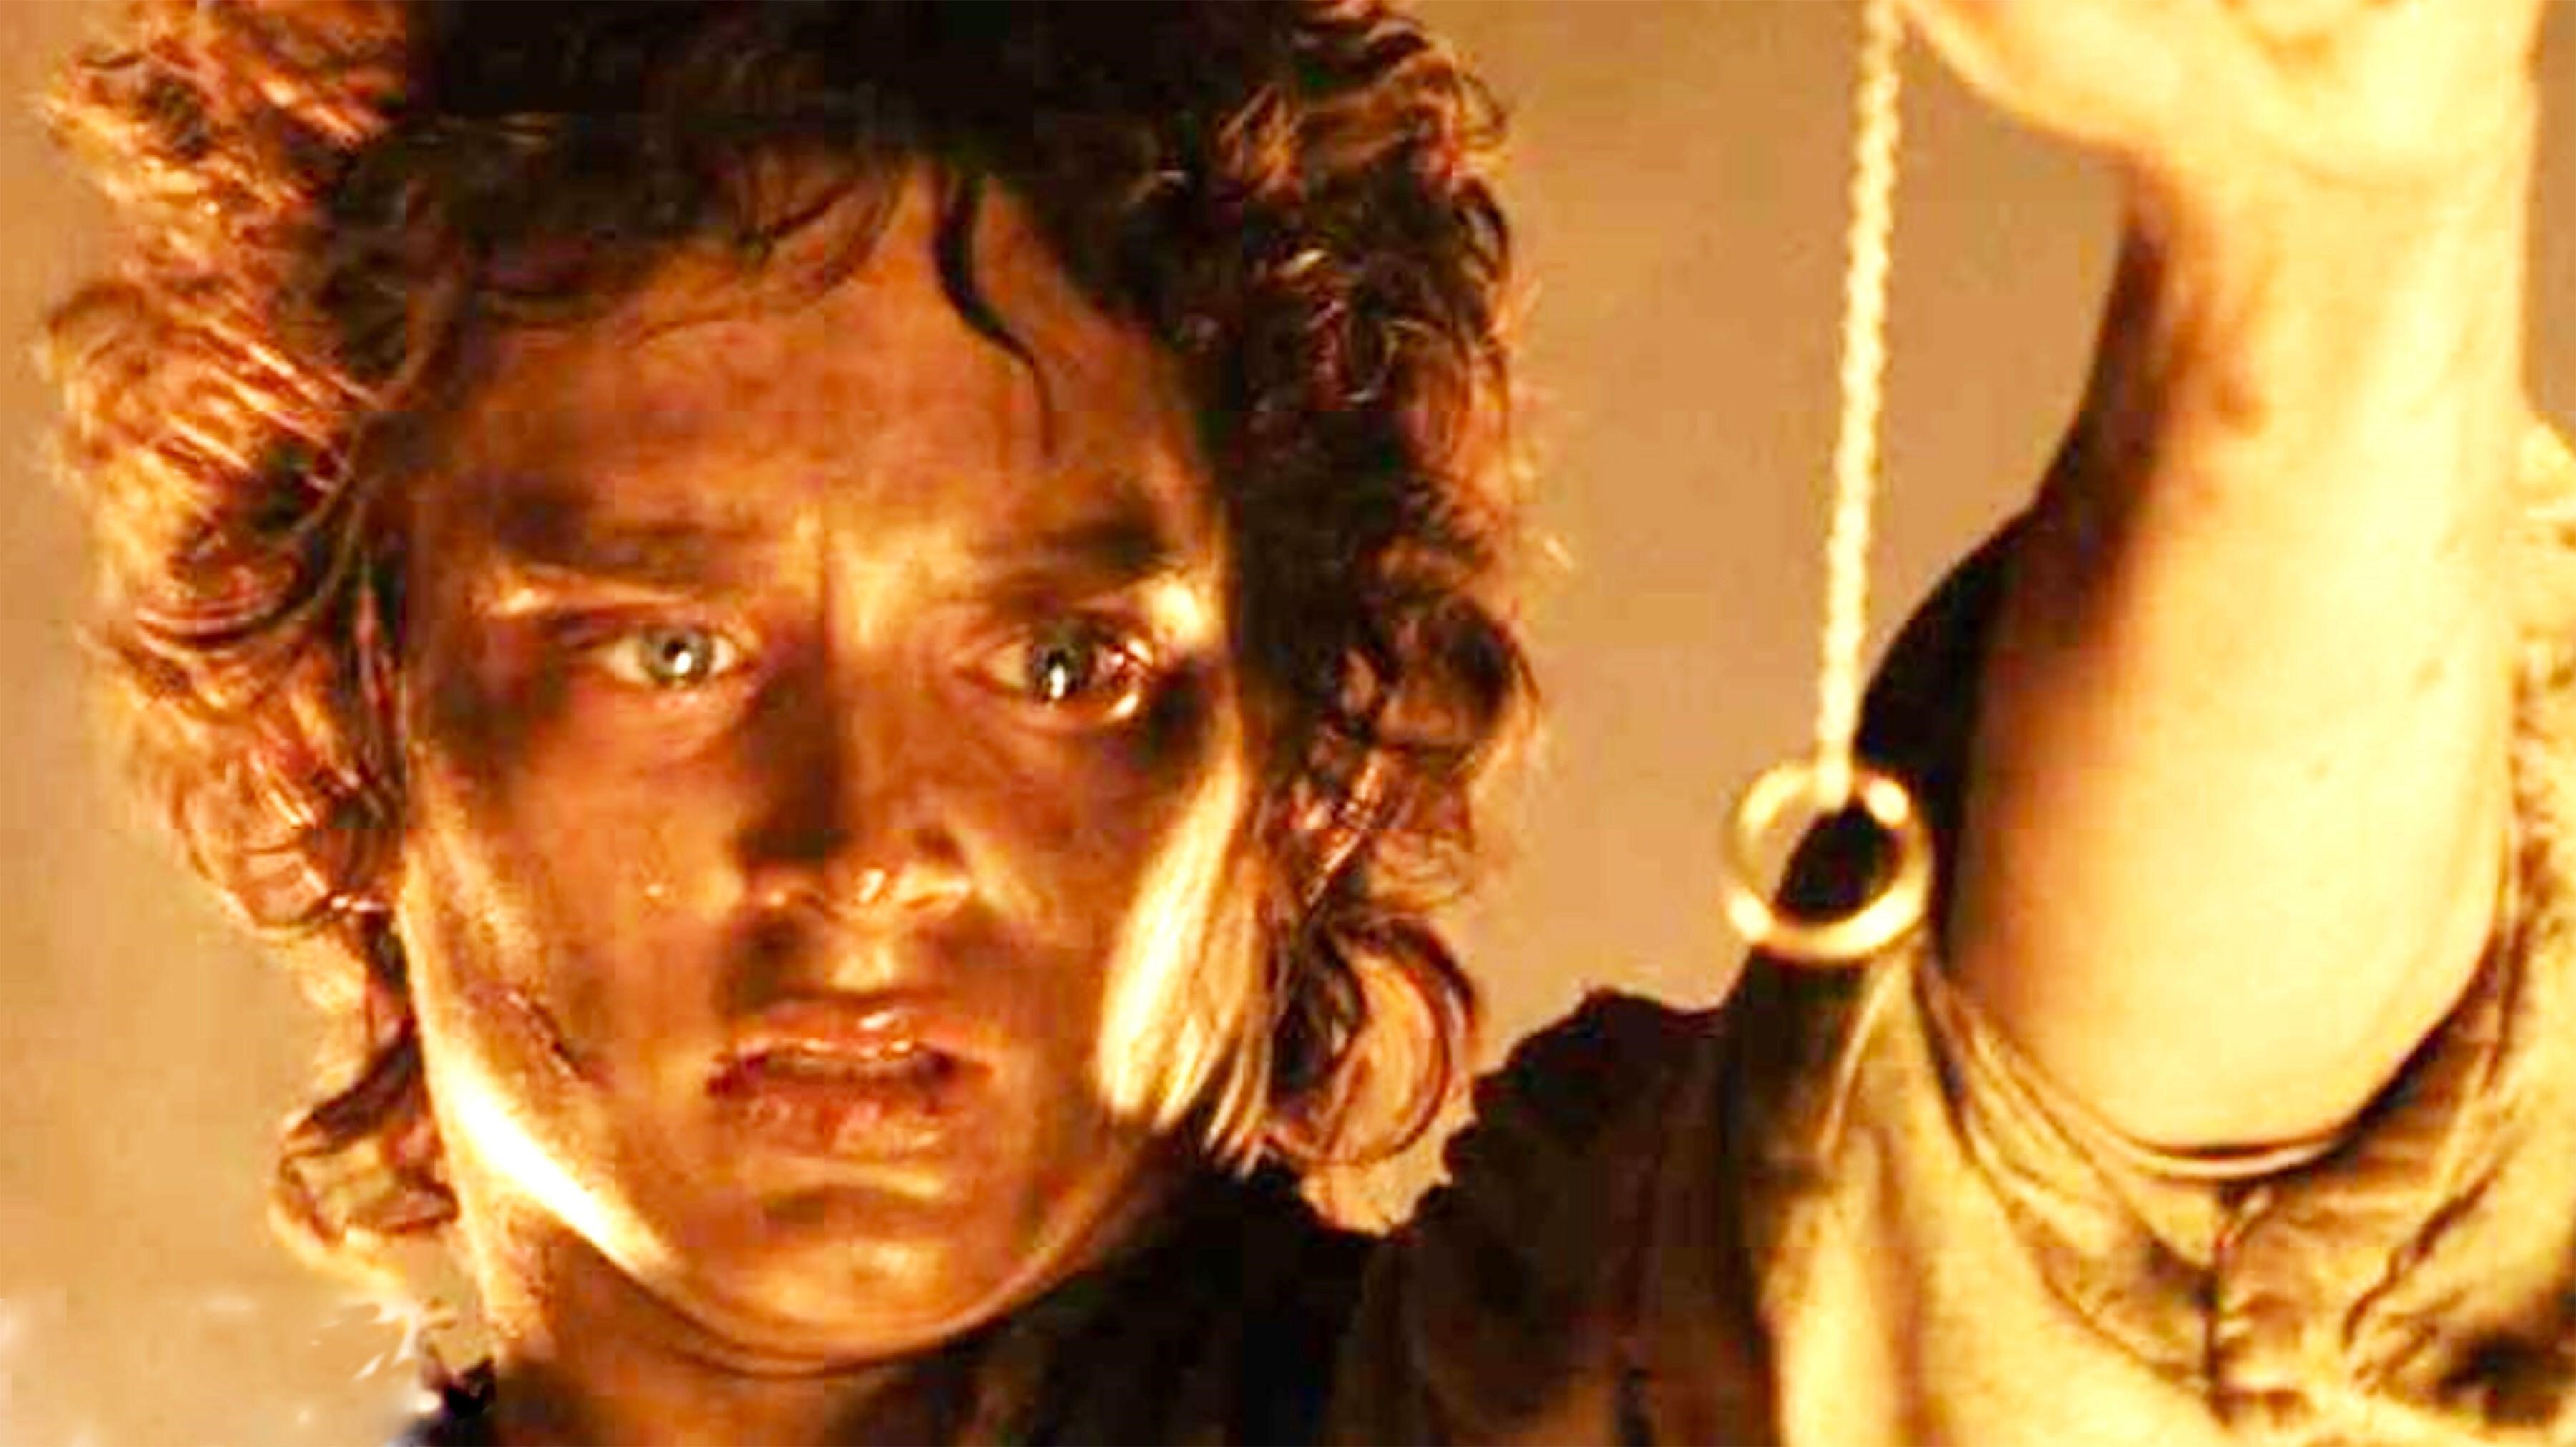 How to watch and stream The Lord of the Rings: The Return of the